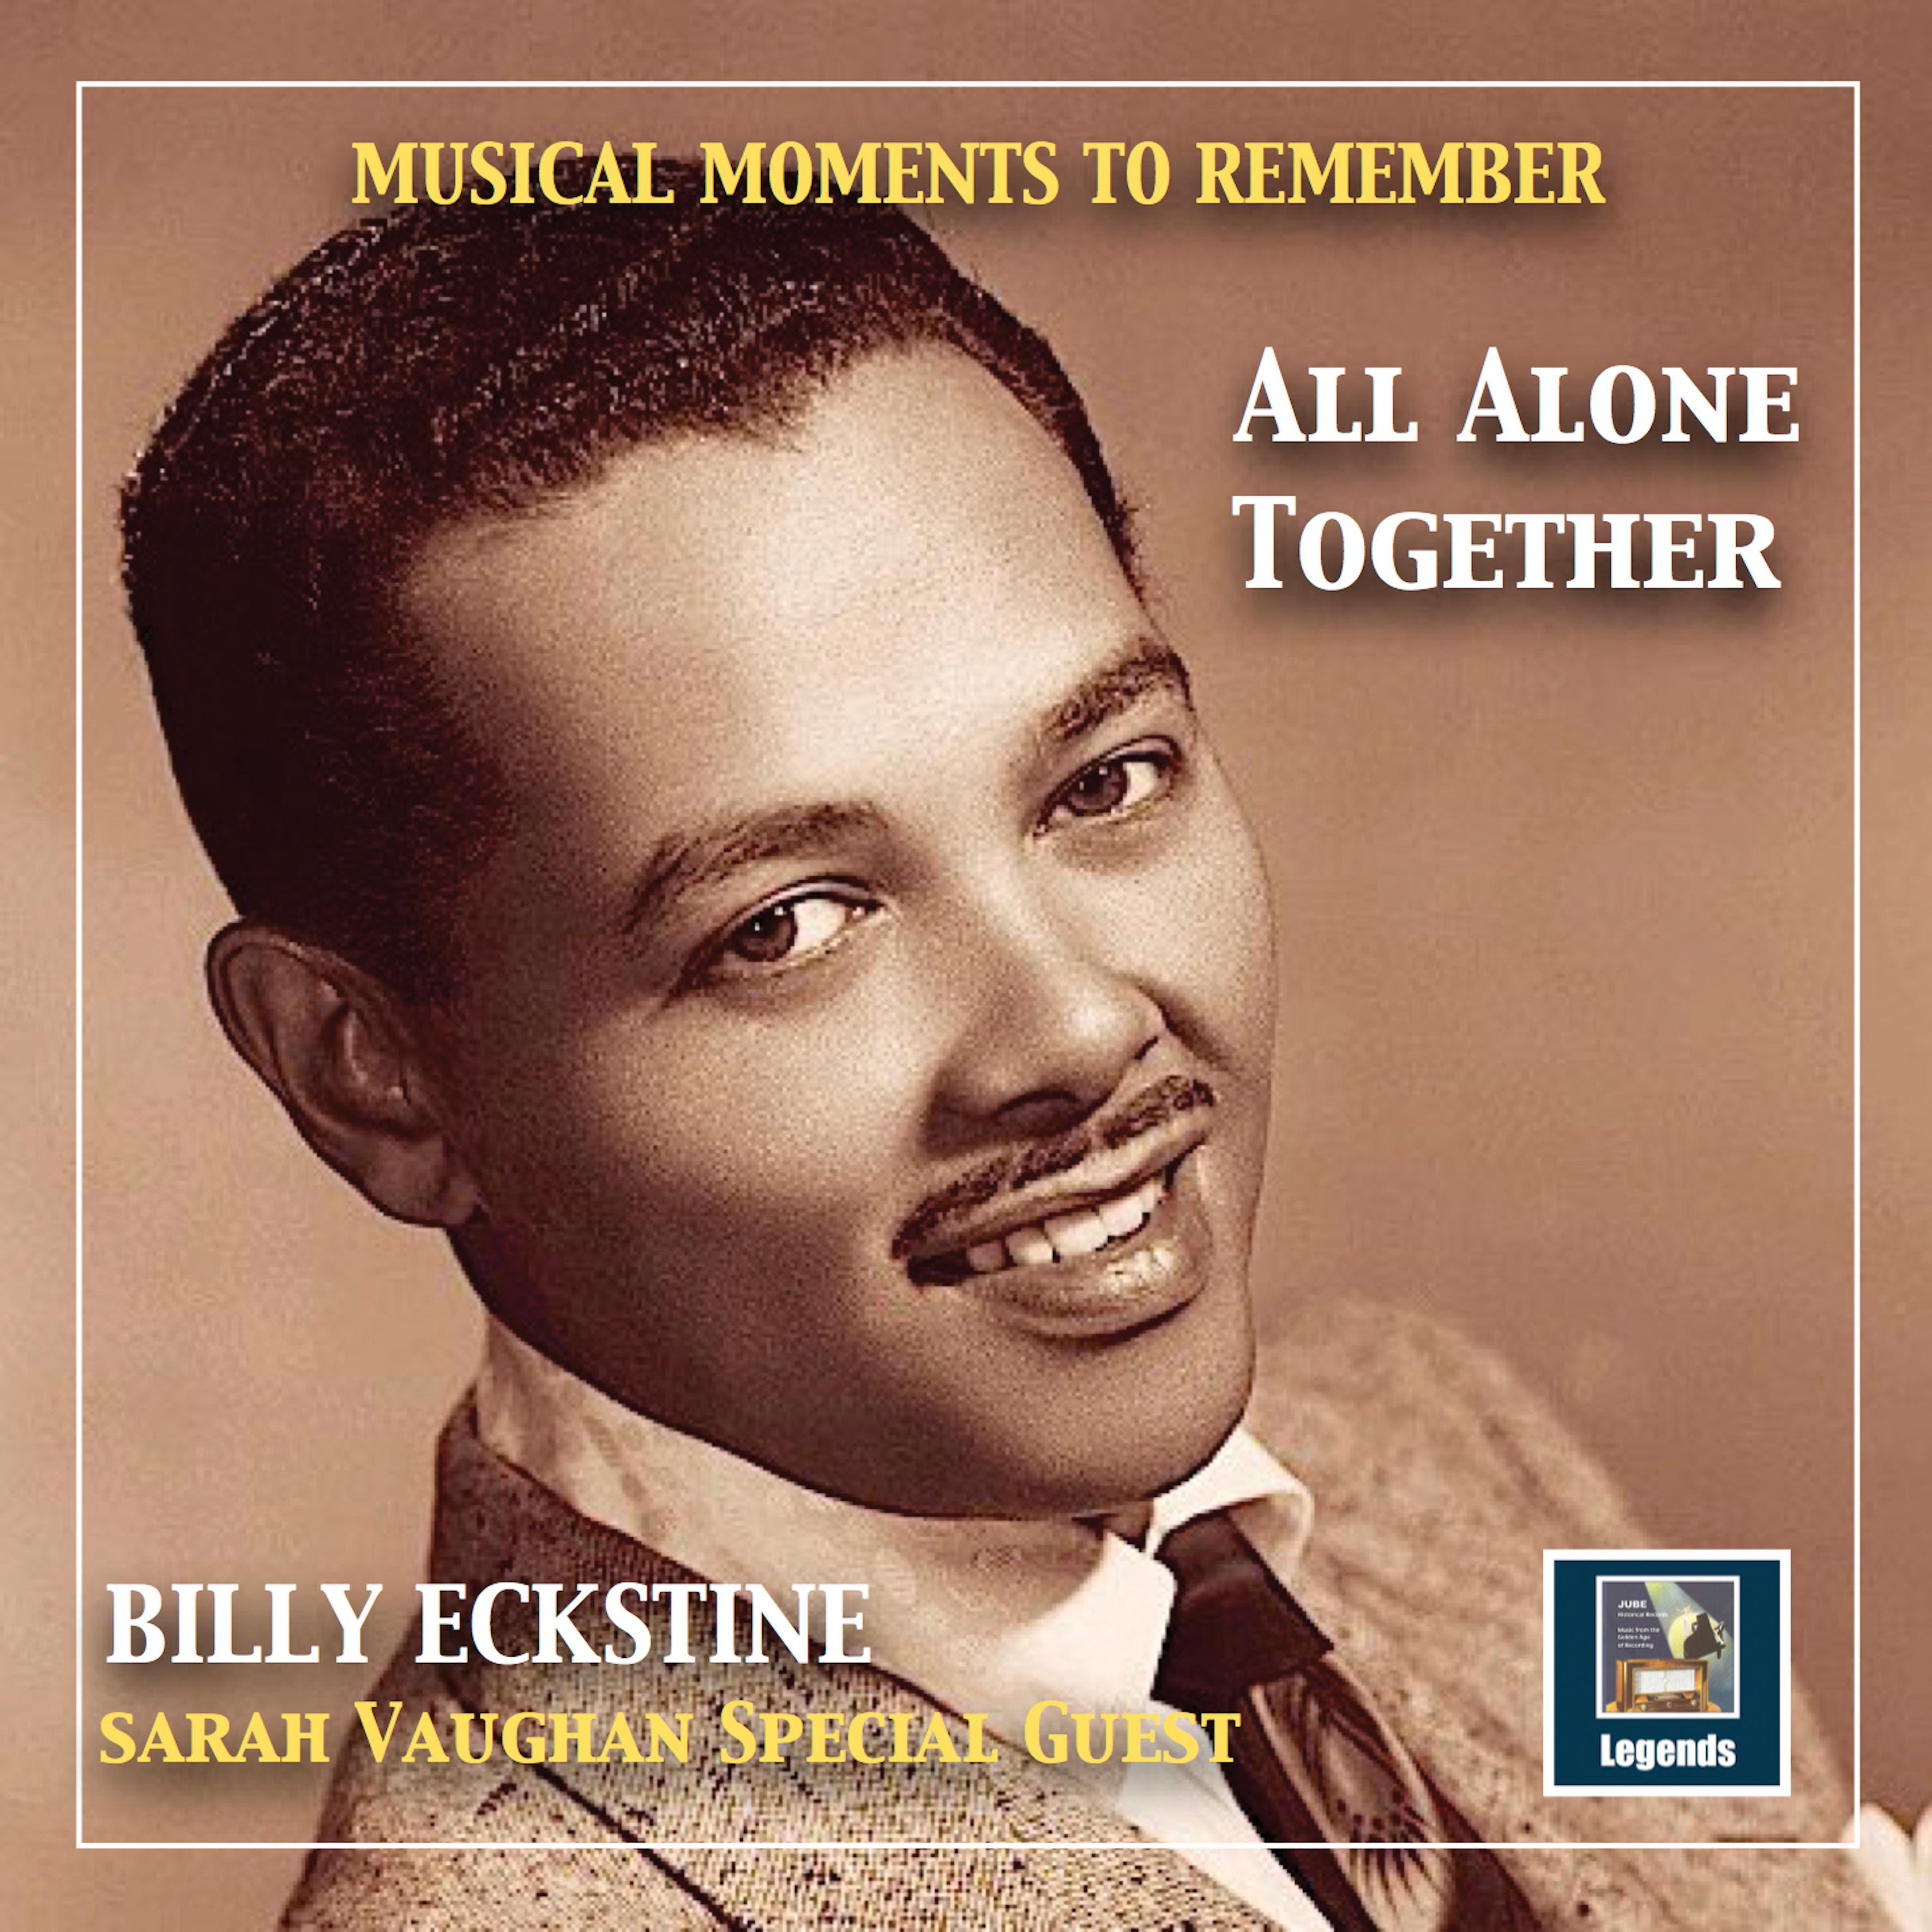 Musical Moments to remember: Billy Eckstine - "All alone together" (2019 Remaster)